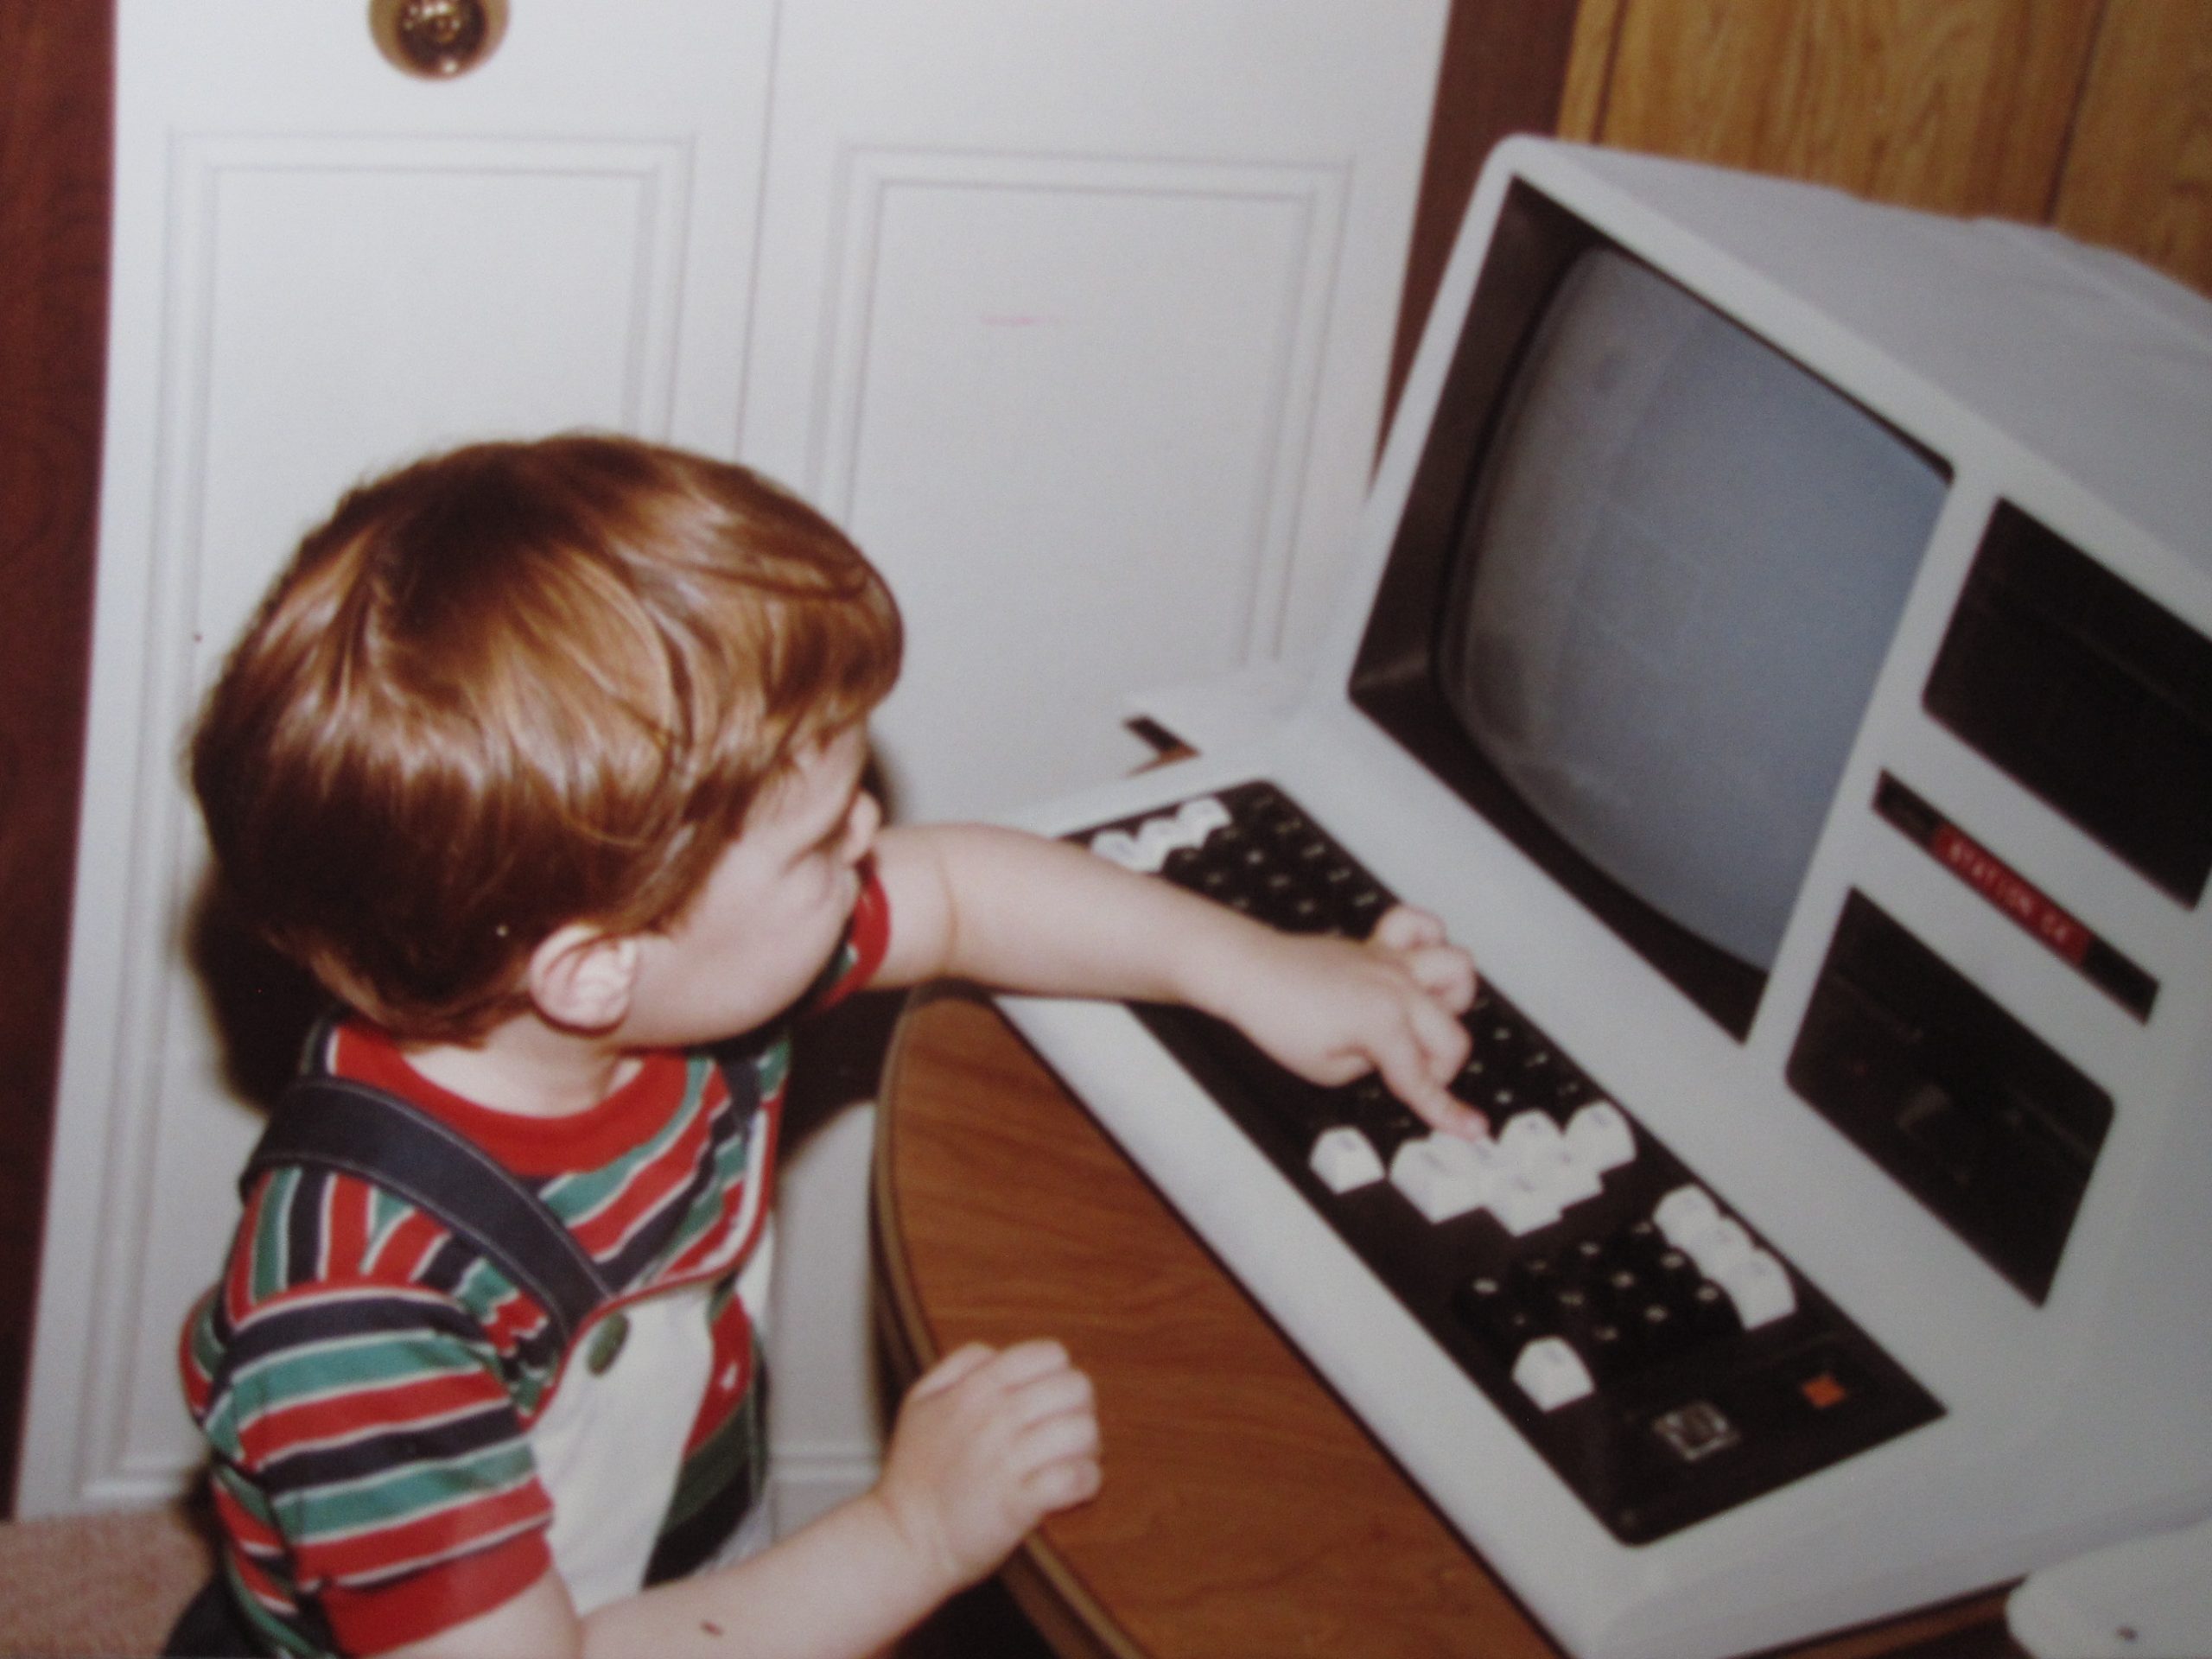 A boy looking at an old computer.